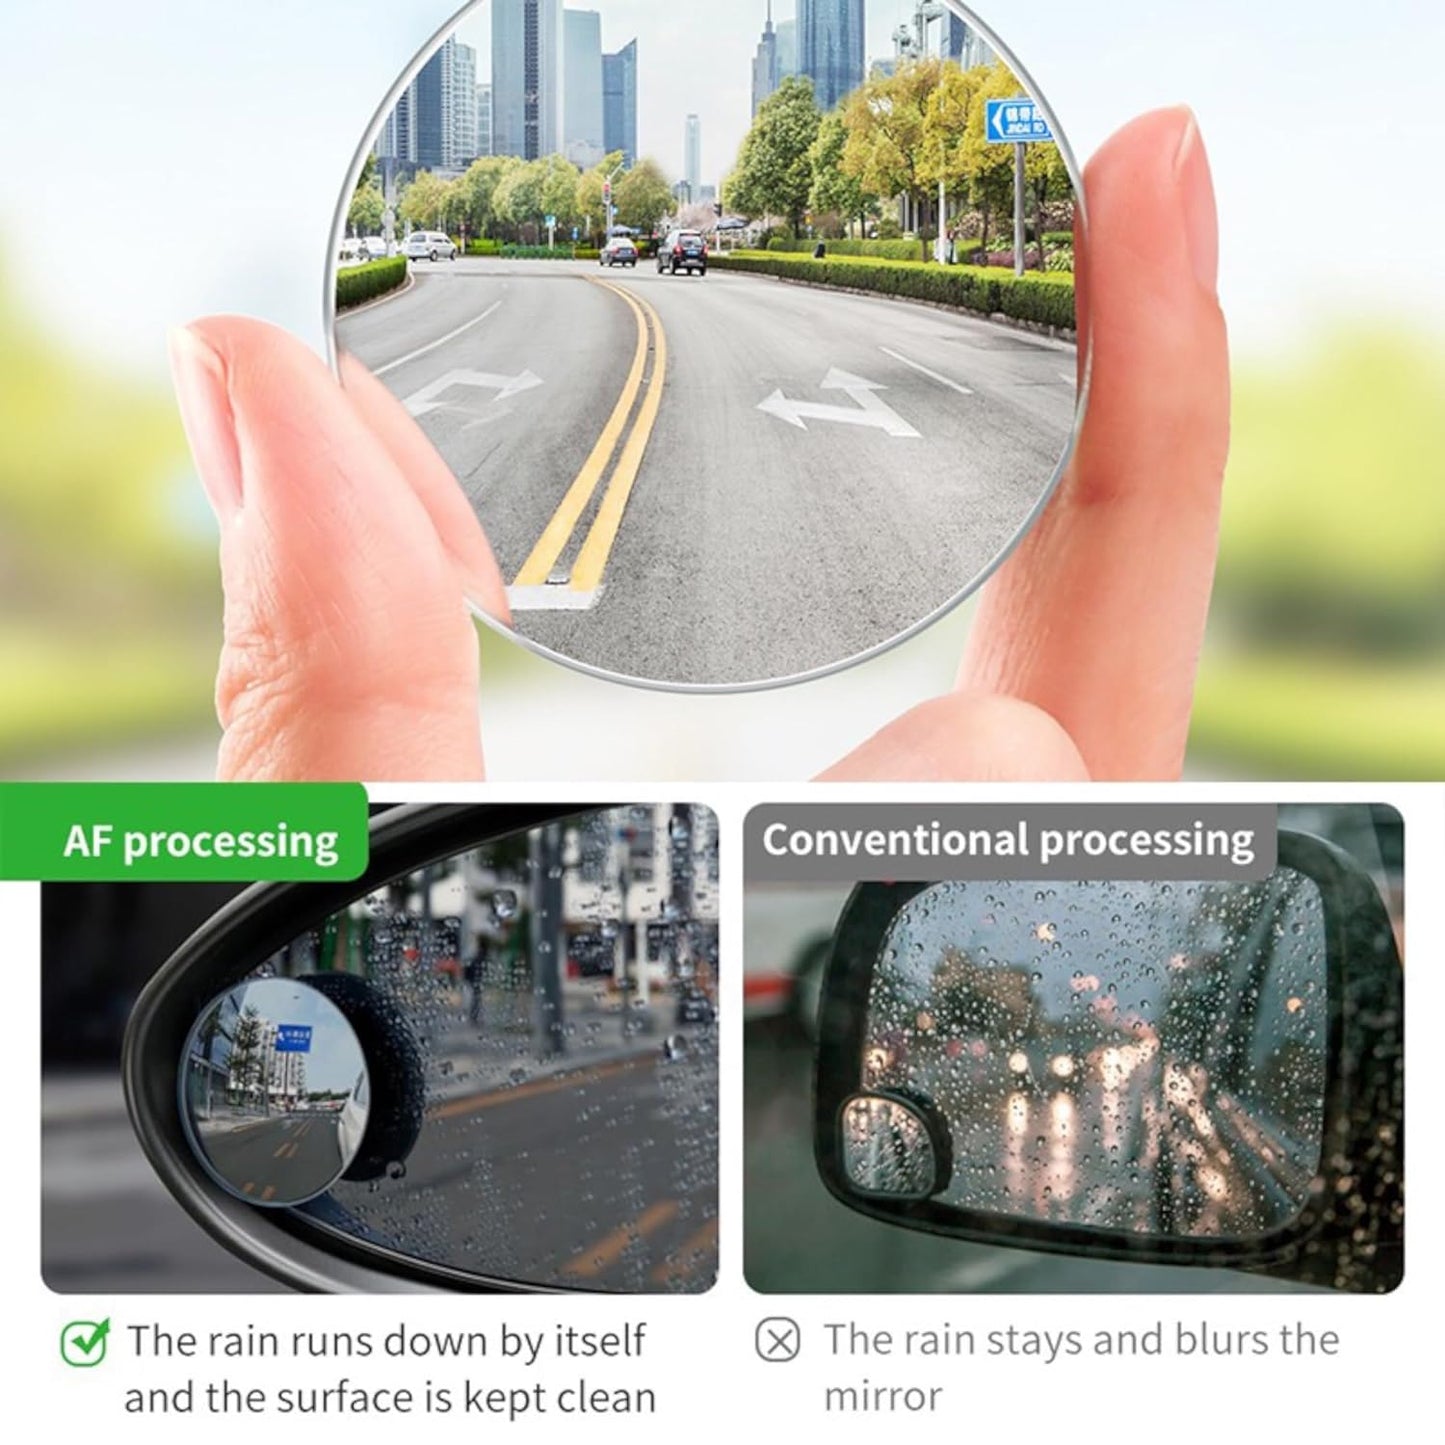 360 degree blind spot rear view mirror (Pack of 2)